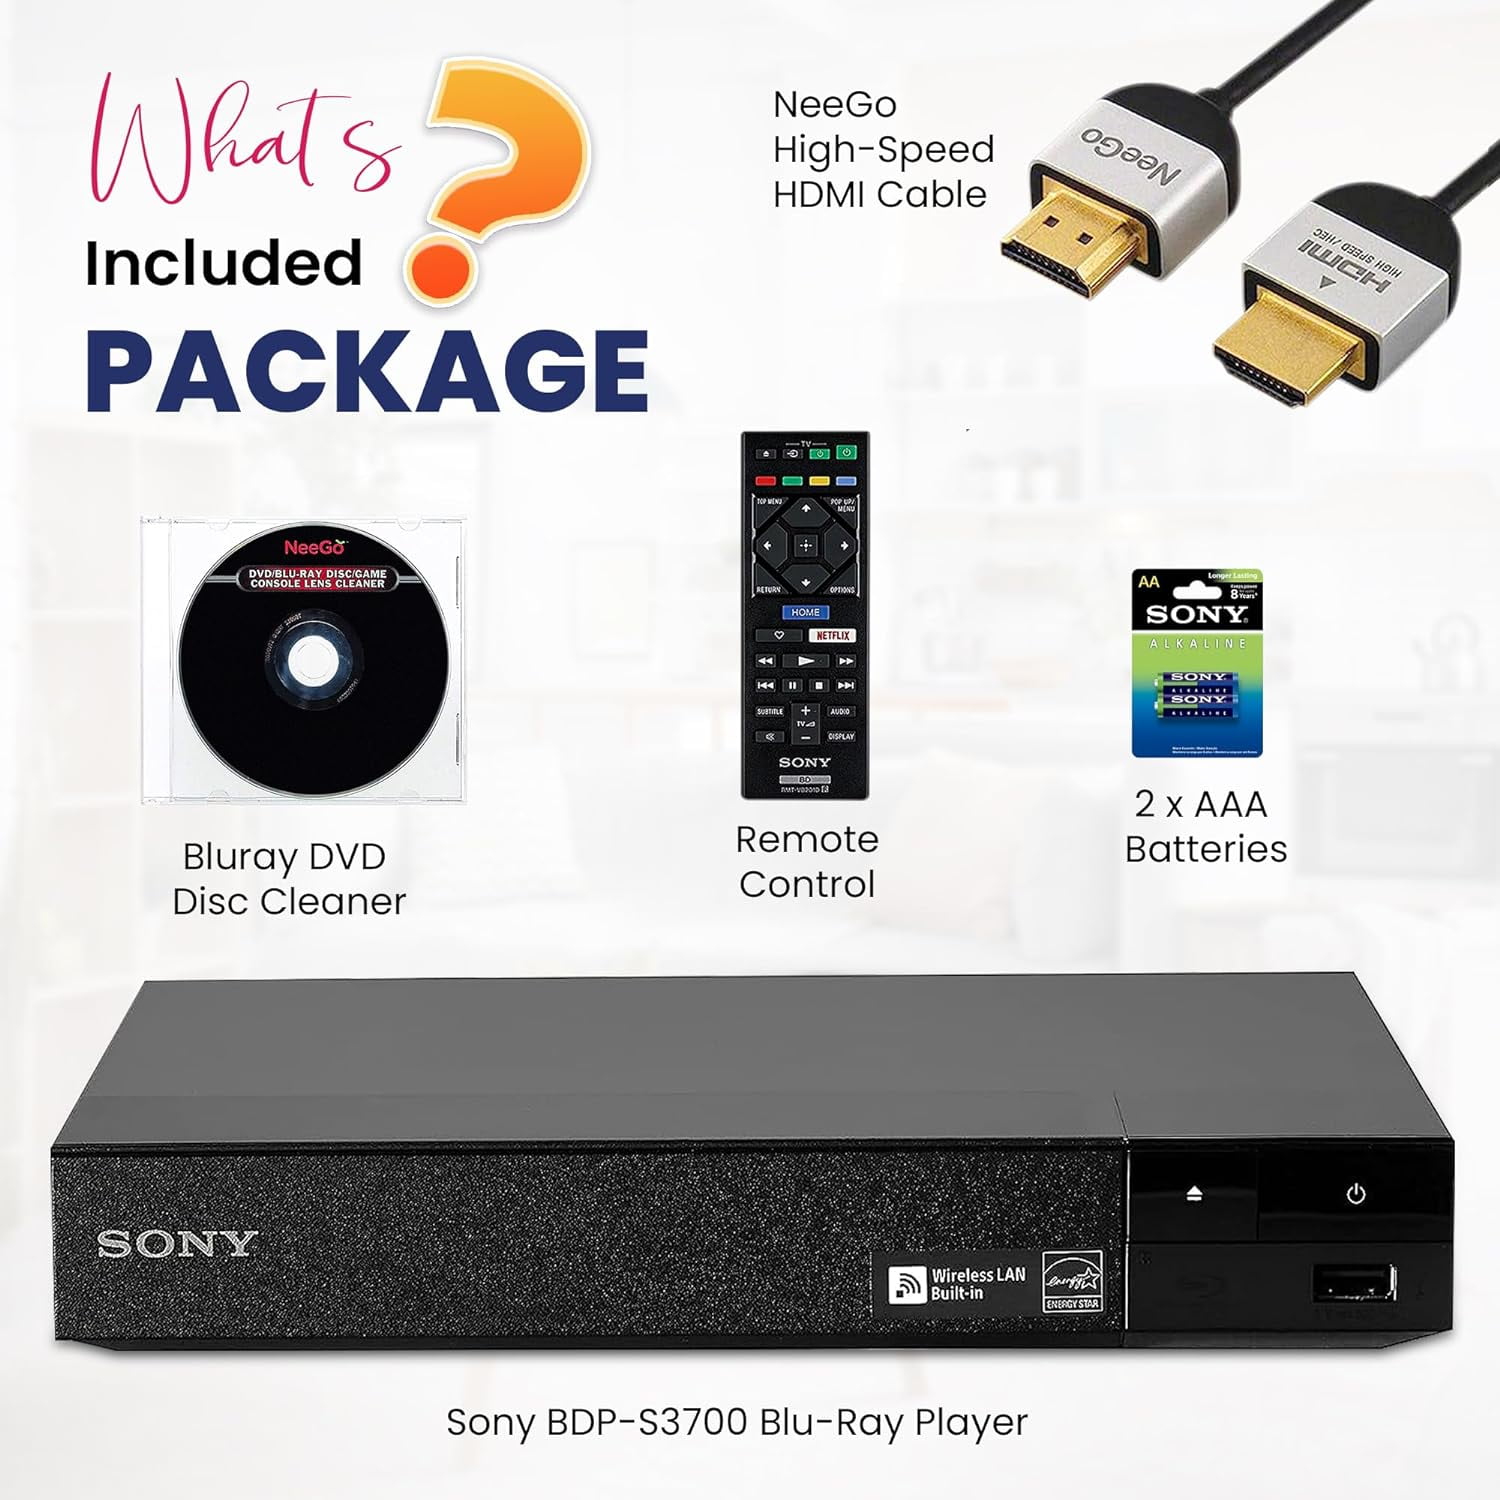 Wi-Fi Remote Ray with TV Ray with Cleaner Blu DVD Sony Combo with Lens HDMI Cable/ Built-in for Blu Smart Player Ethernet and DVD Player Player NeeGo BDP-S3700/BDP-BX370 Blu-Ray/DVD